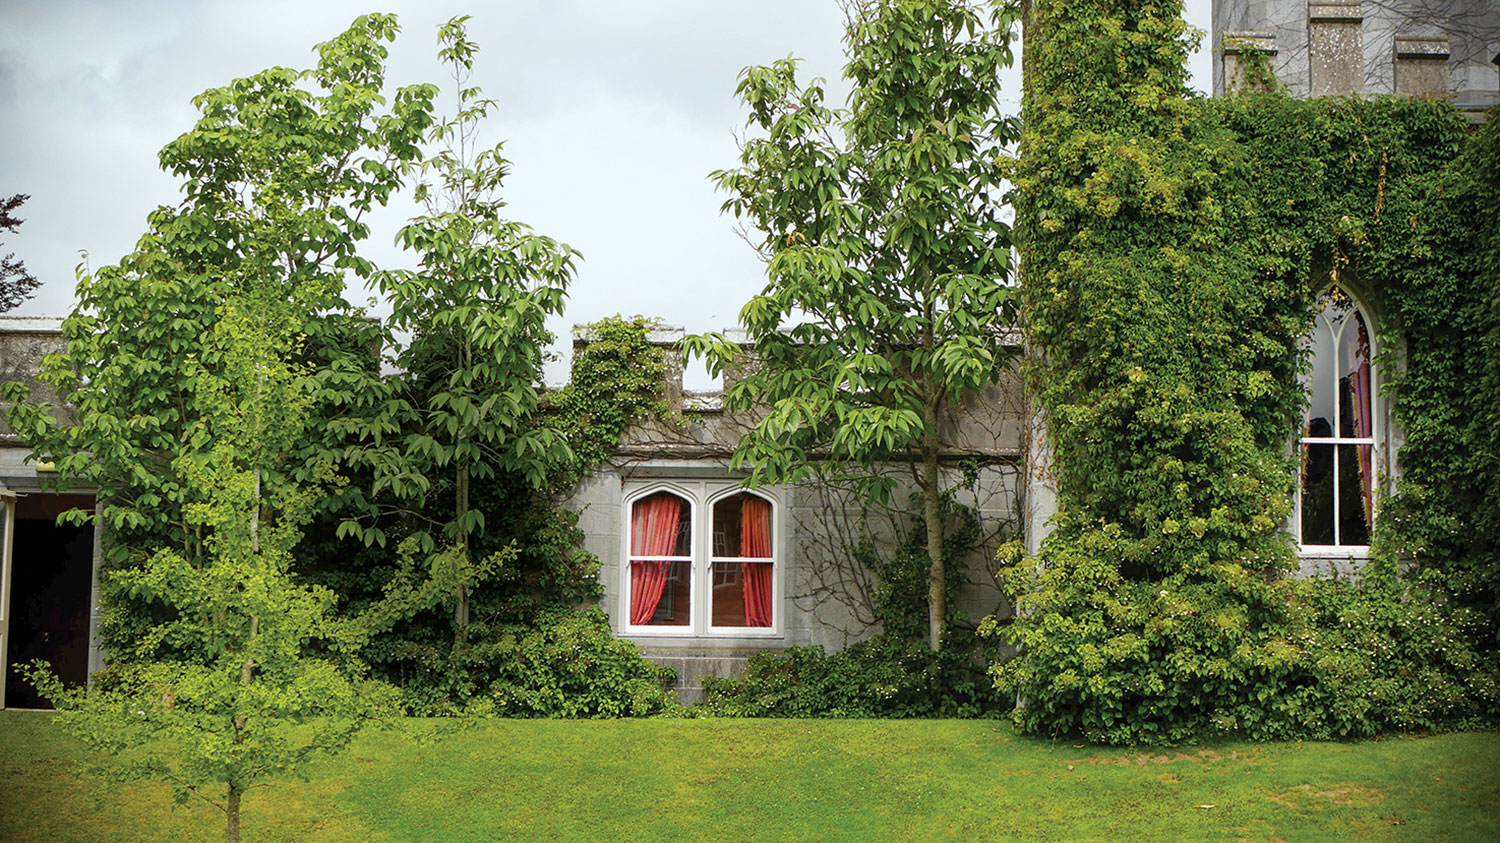 Lush greenery covers much of a merlon-topped, gray stone Irish castle. Red curtains are visible through pointed arch windows. A tree sapling planted in a neatly cut, bright green lawn stands in the foreground.